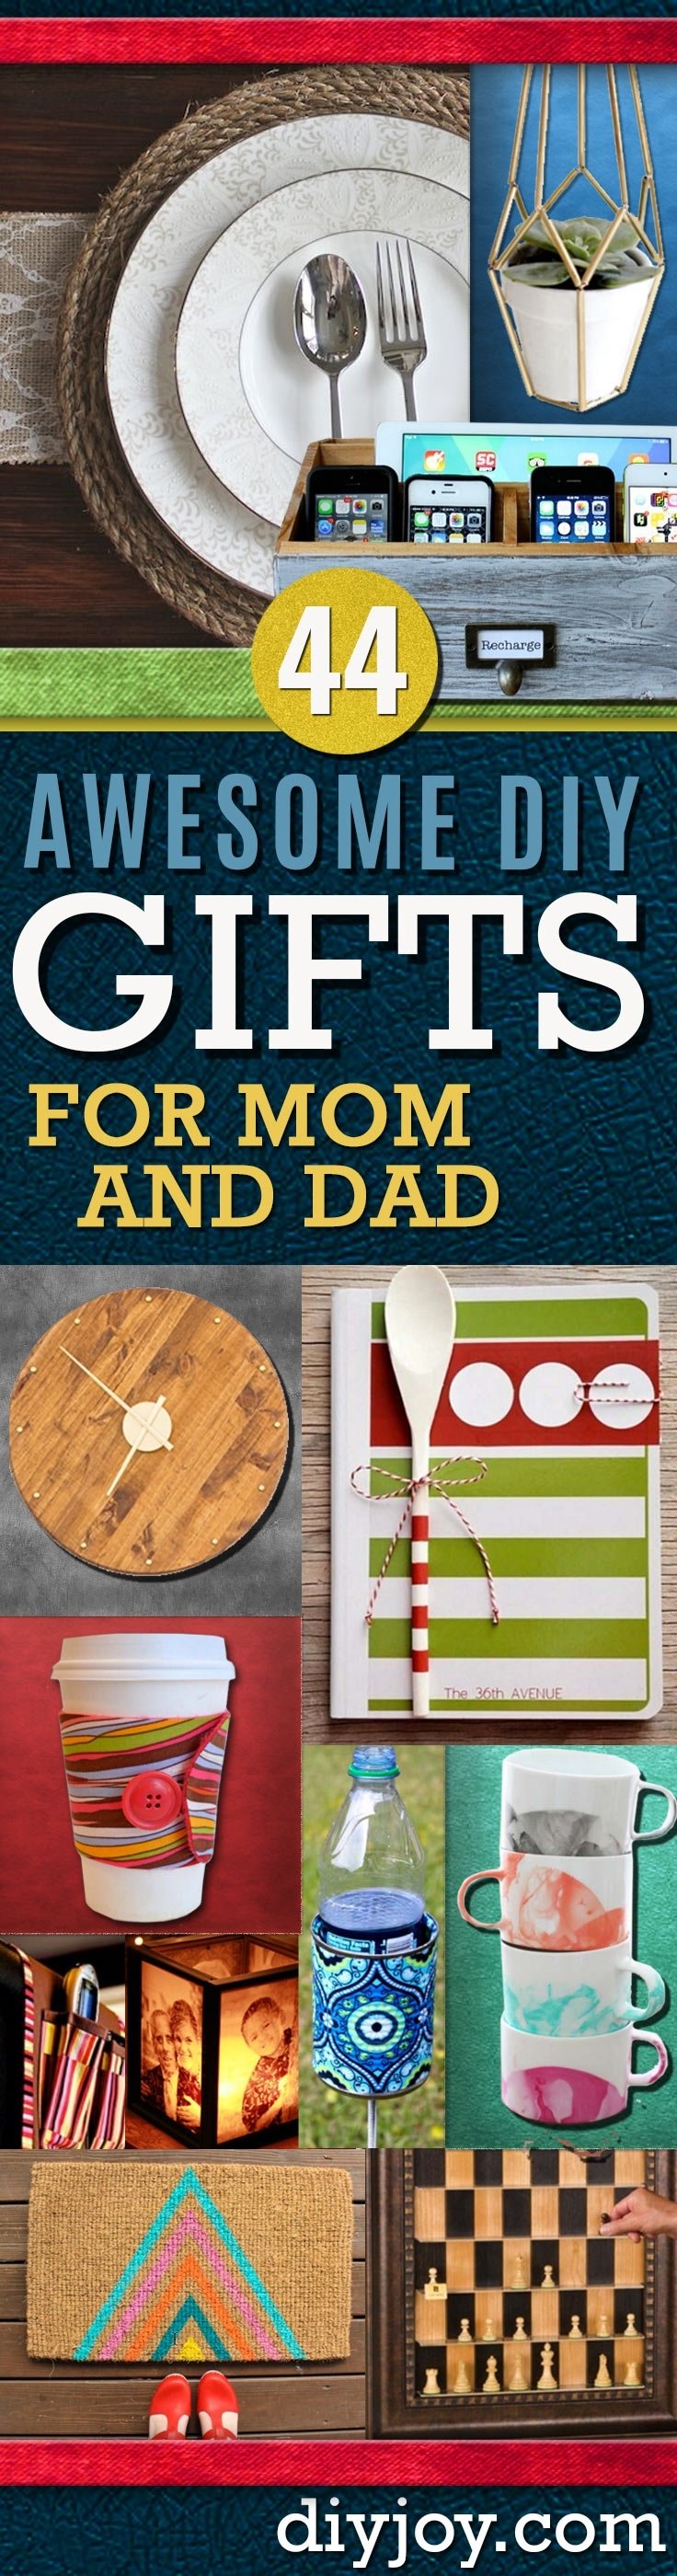 10 Ideal Mom And Dad Christmas Gift Ideas awesome diy gift ideas mom and dad will love 23 2022